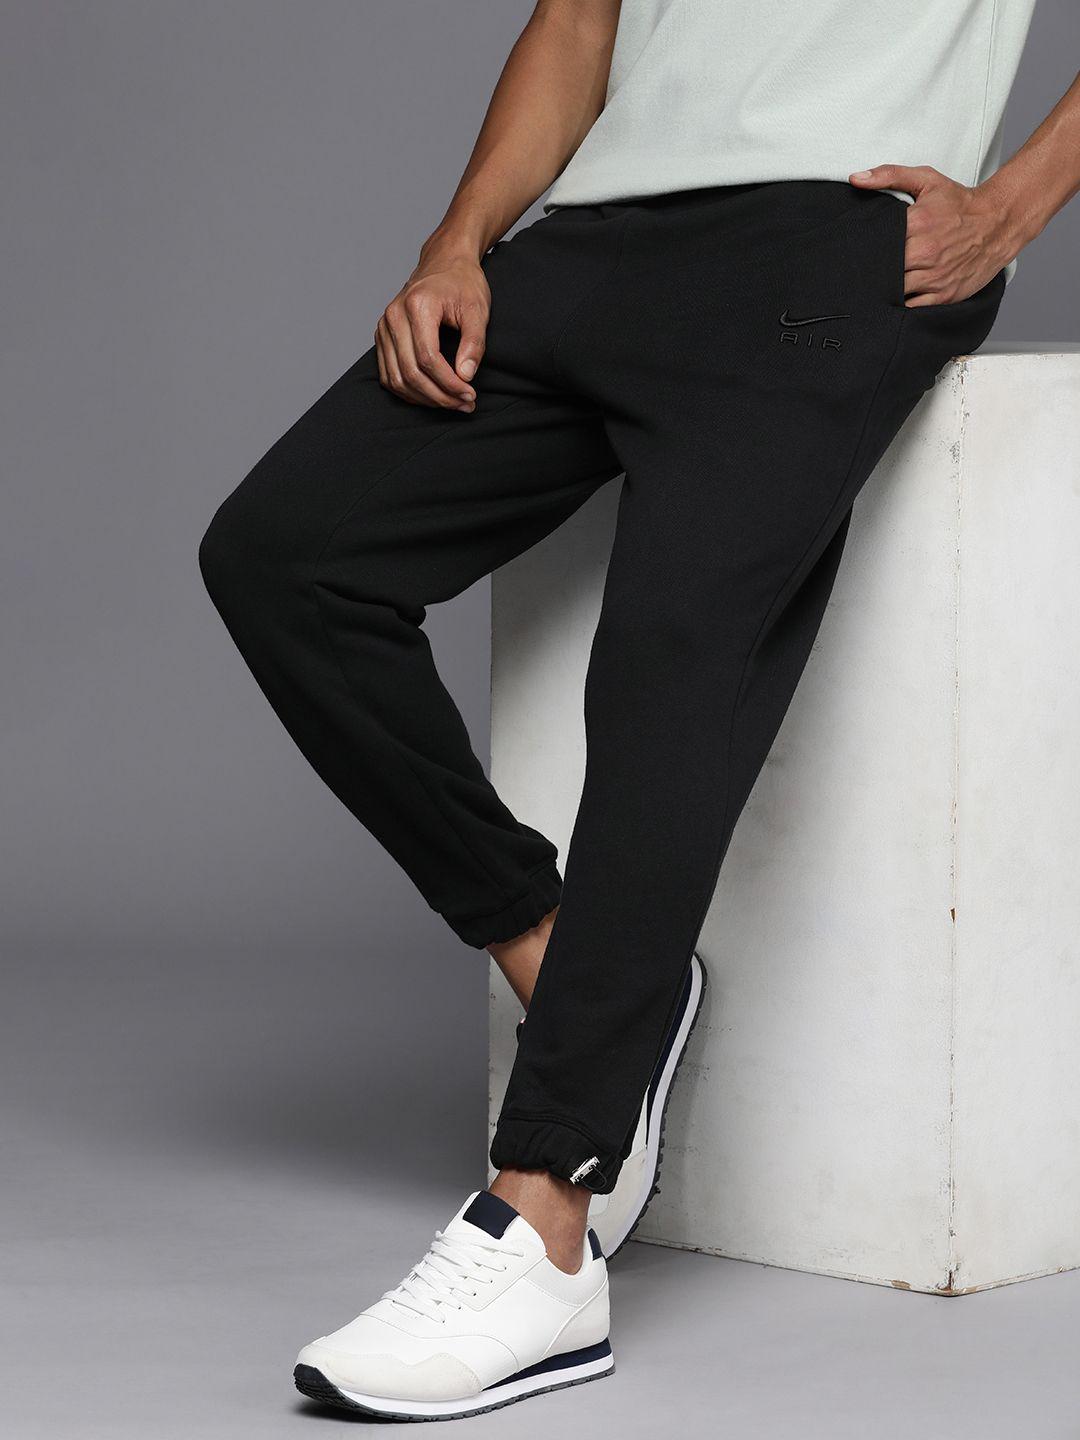 nike men as nsw air ft pure cotton joggers with drawstring closure